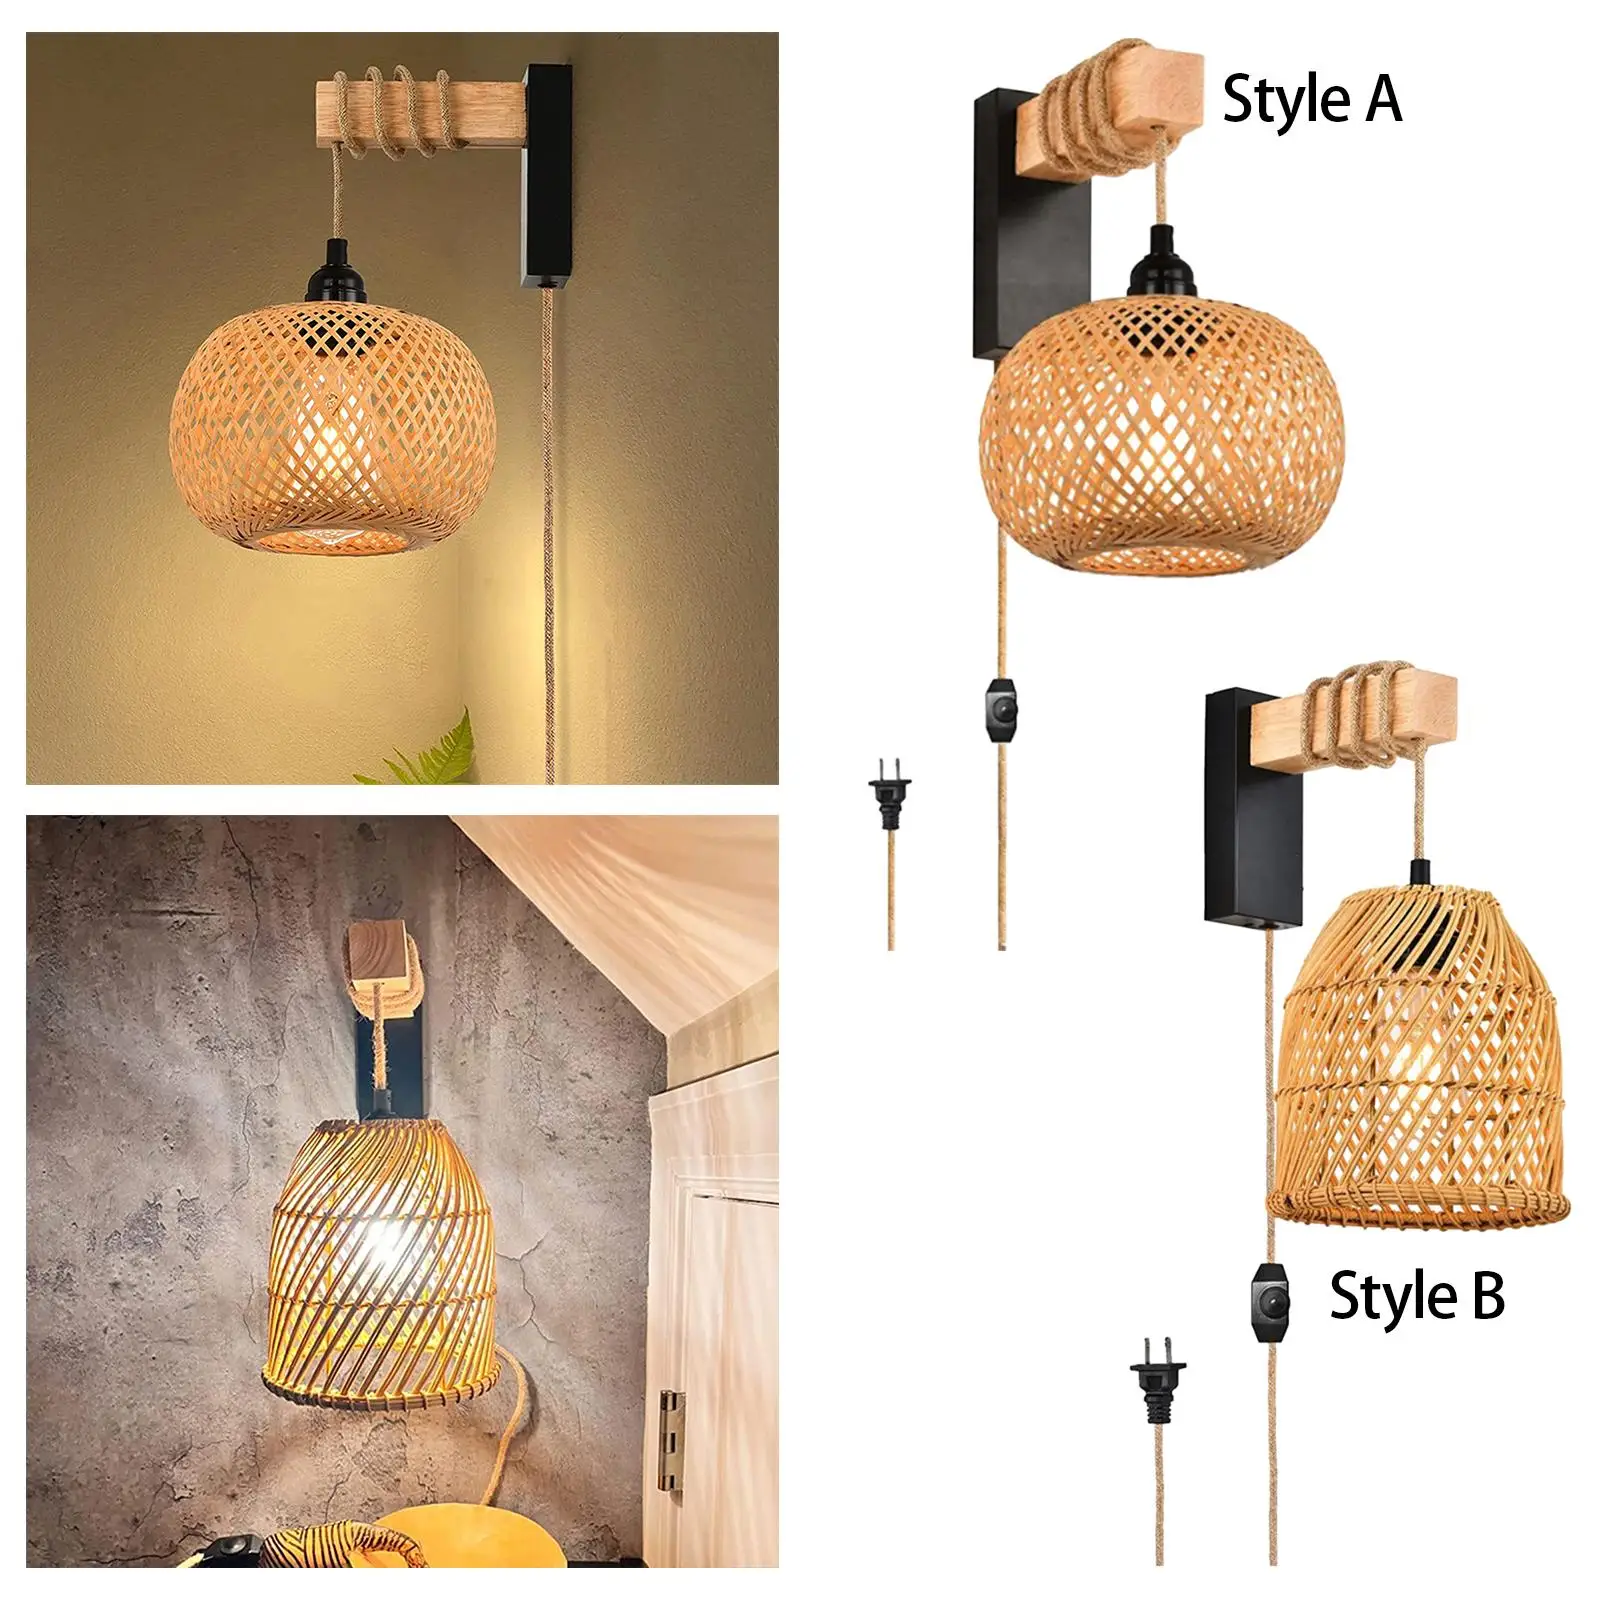 Rattan Wall Lamp Lantern Wall Light Plug in Wall Sconce Pendant Lights for Bedroom Living Room Dining Room Hallway Cafe Aisle